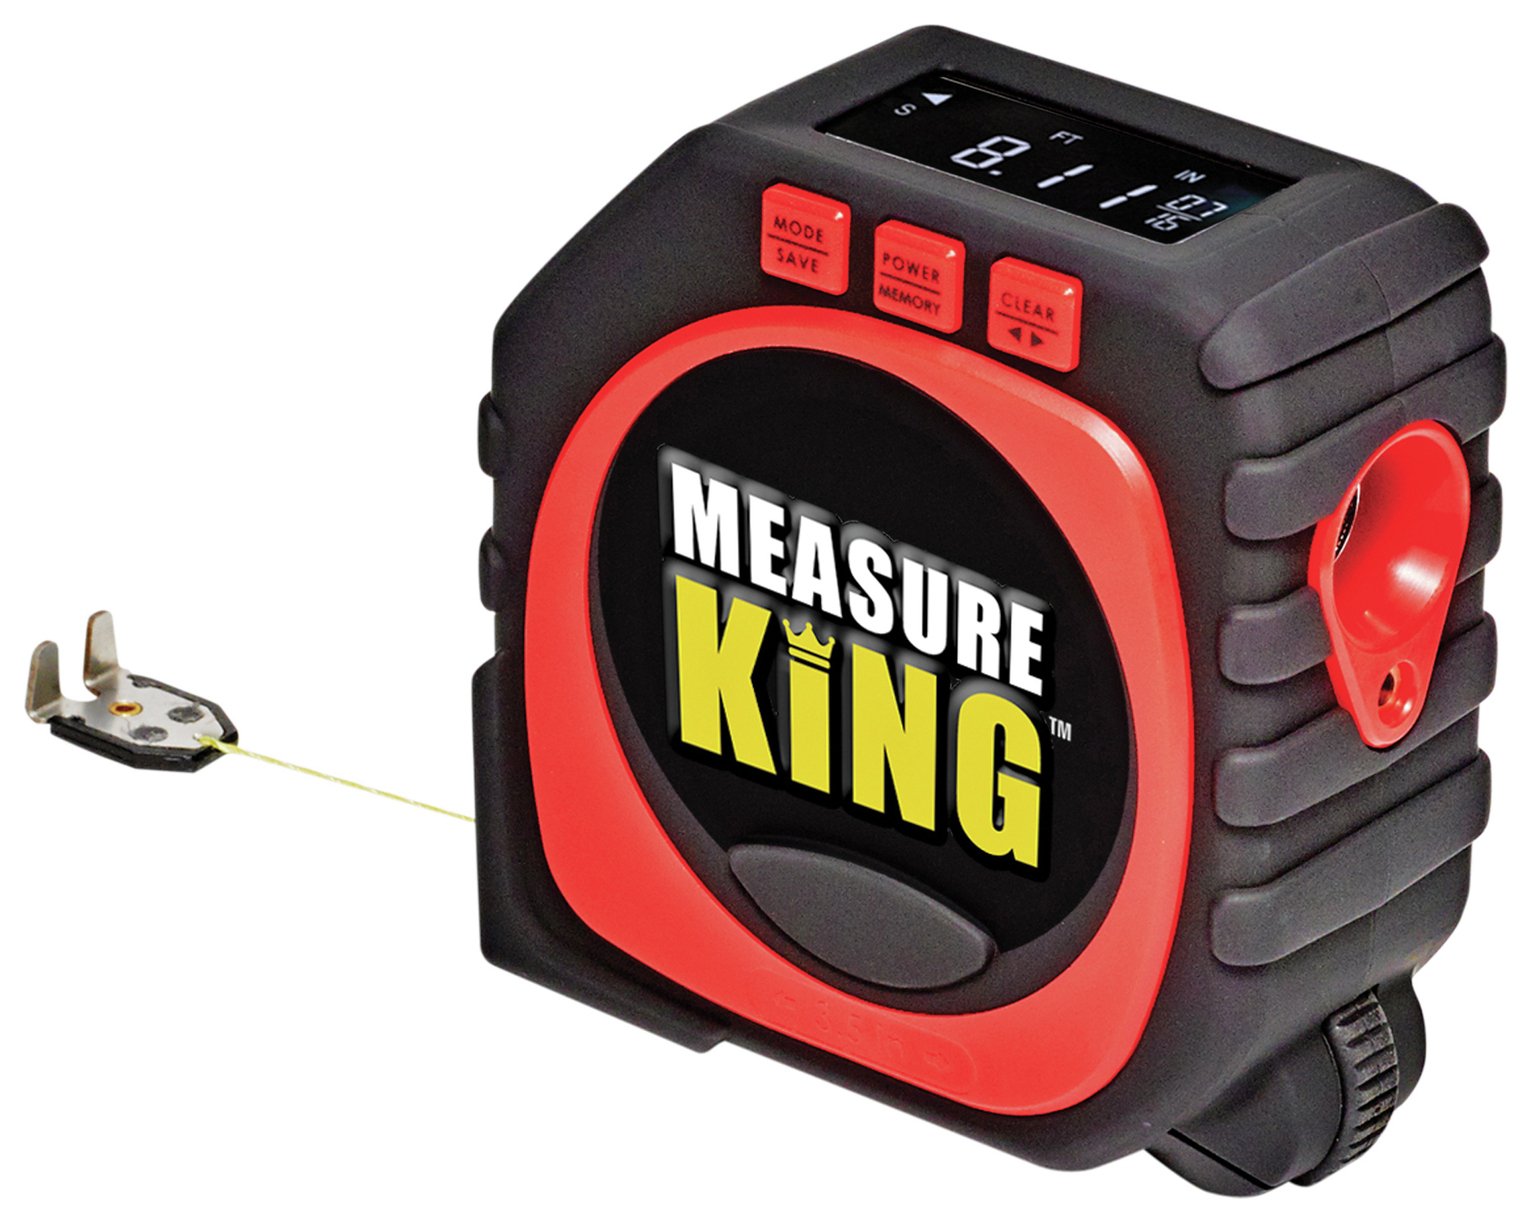 Thane Measure King review